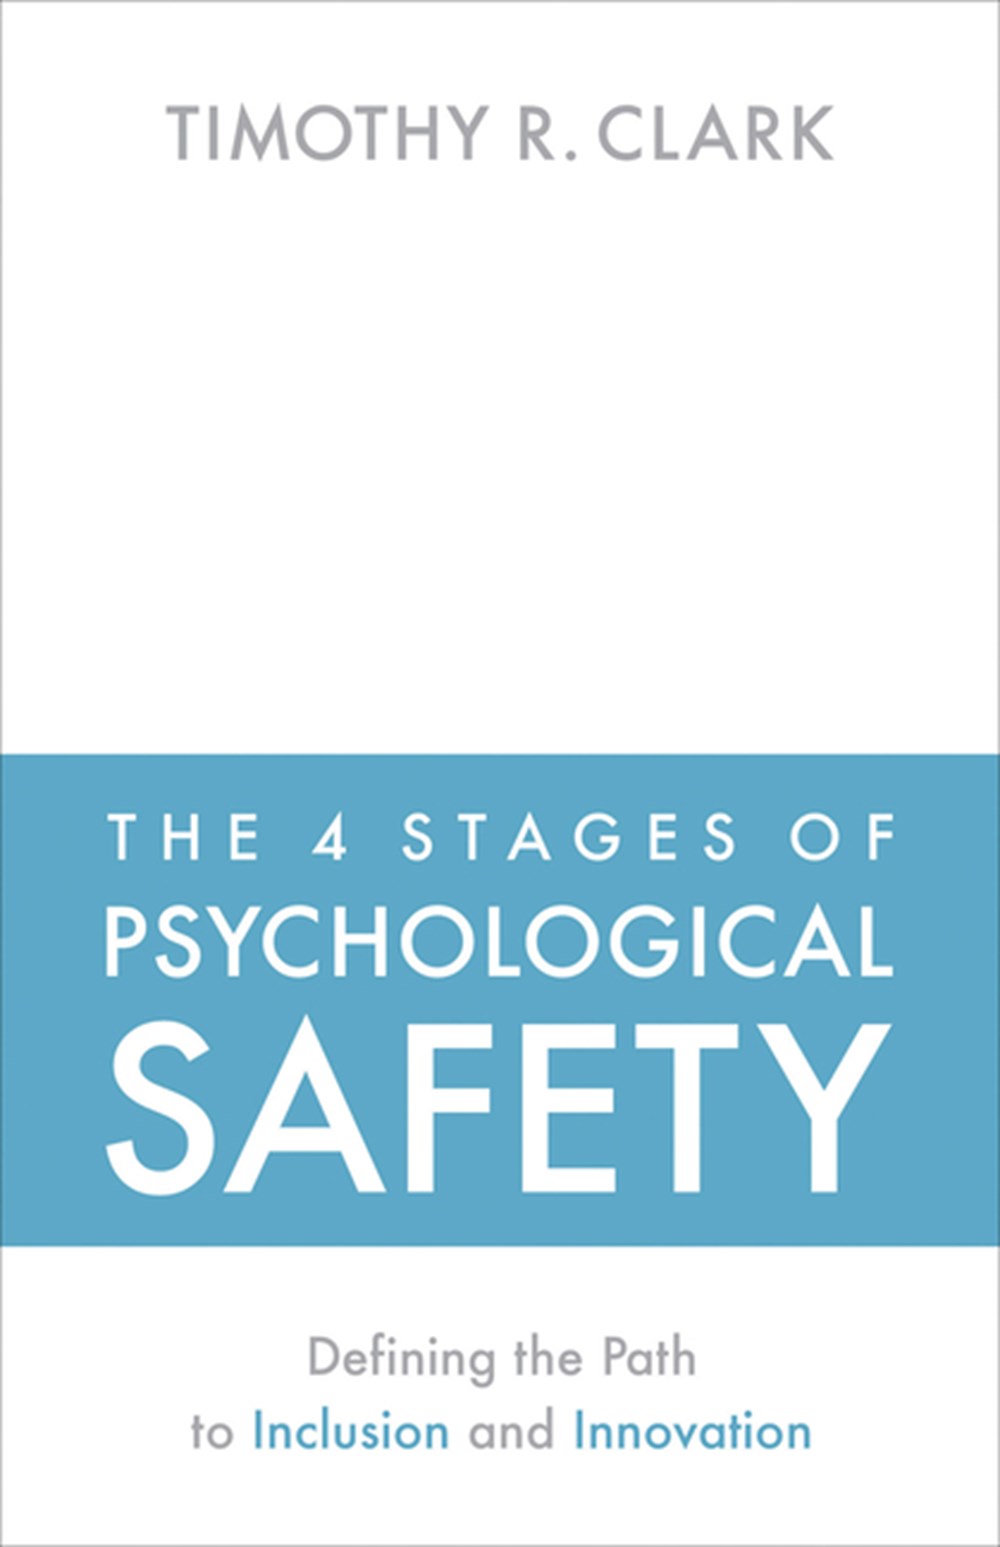 4 Stages of Psychological Safety Defining the Path to Inclusion and Innovation